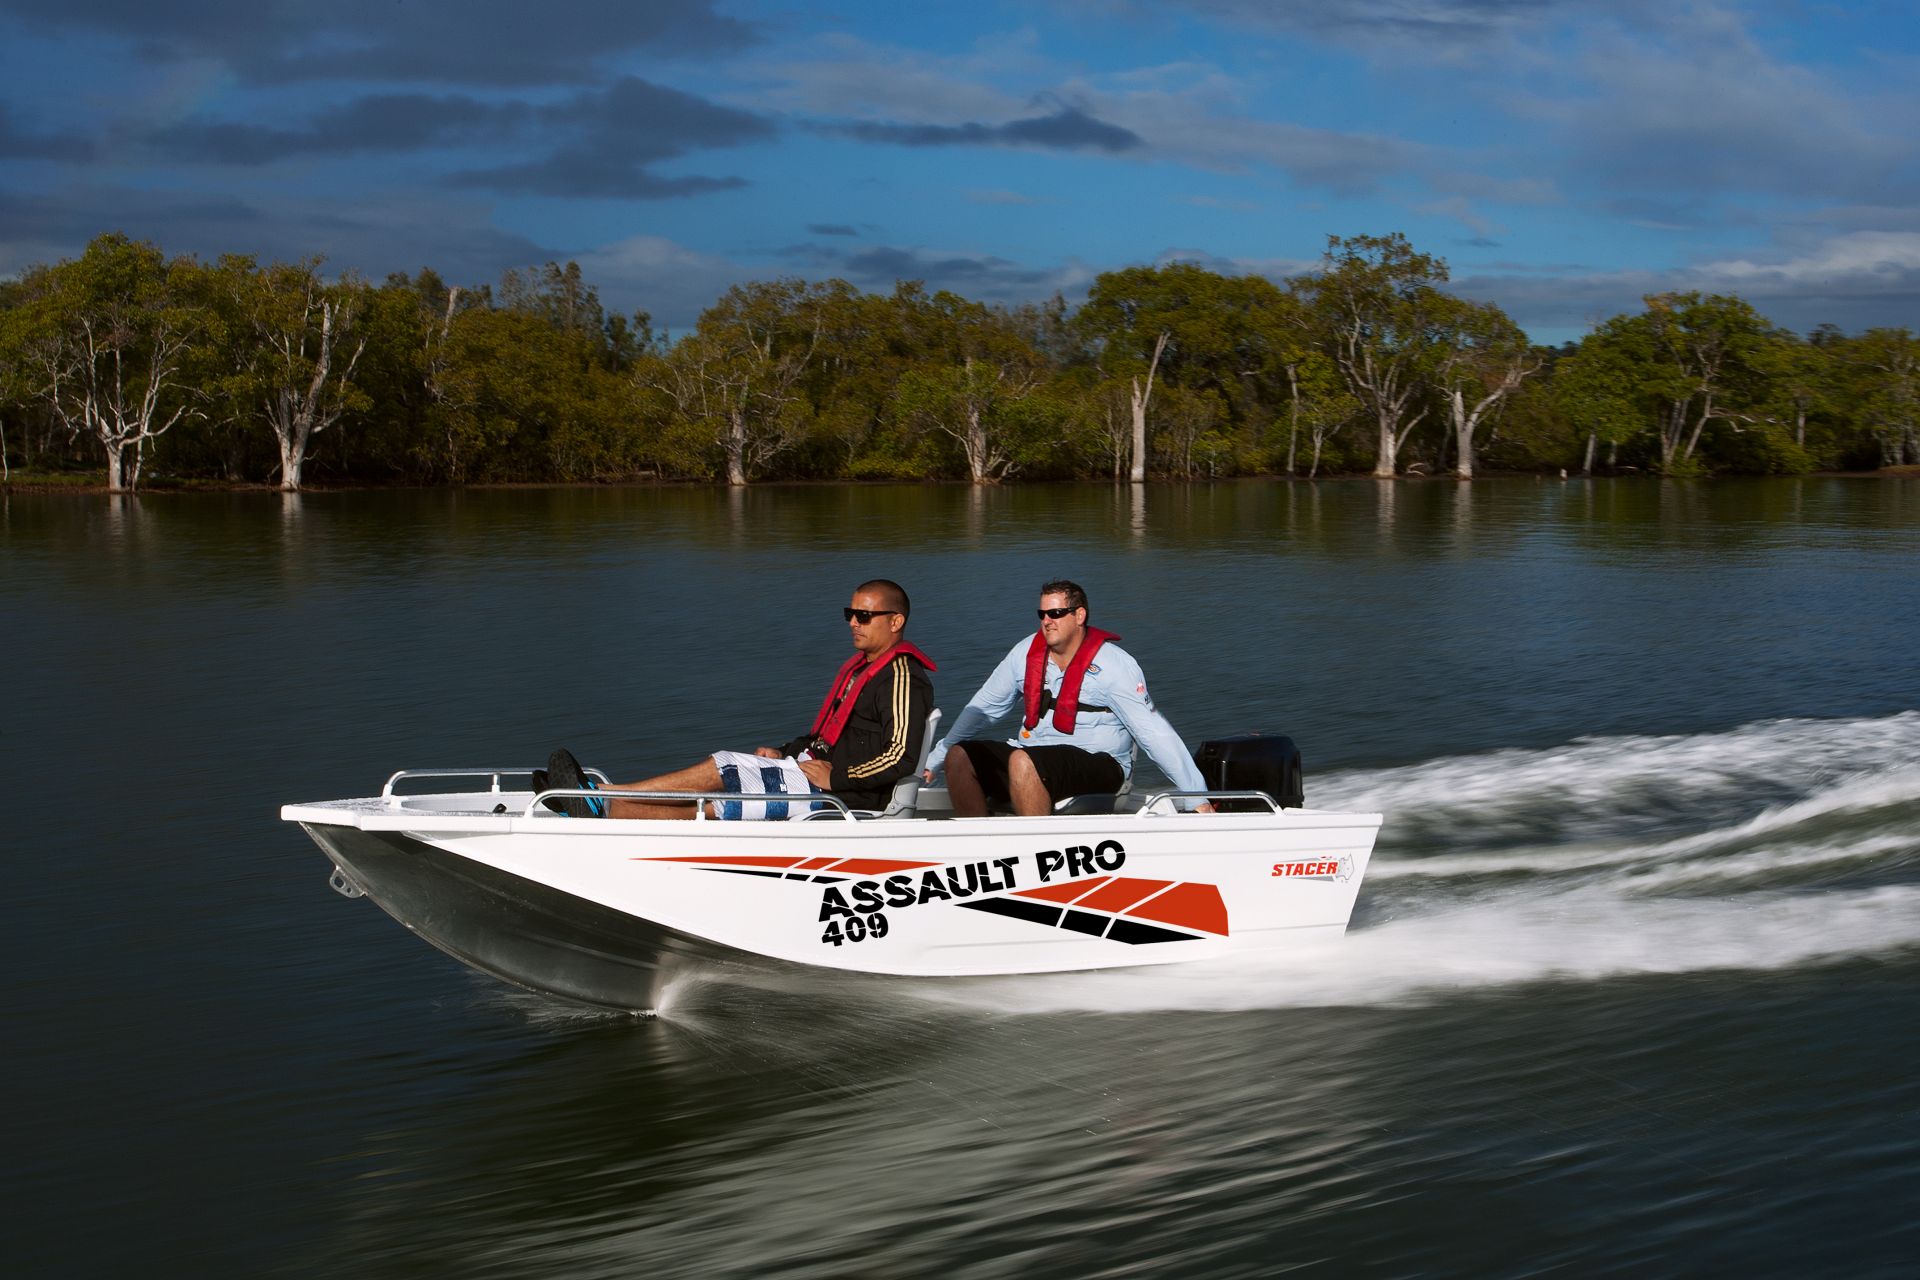 Stacer’s 409 Assault Pro is the Ultimate Compact Fishing Boat